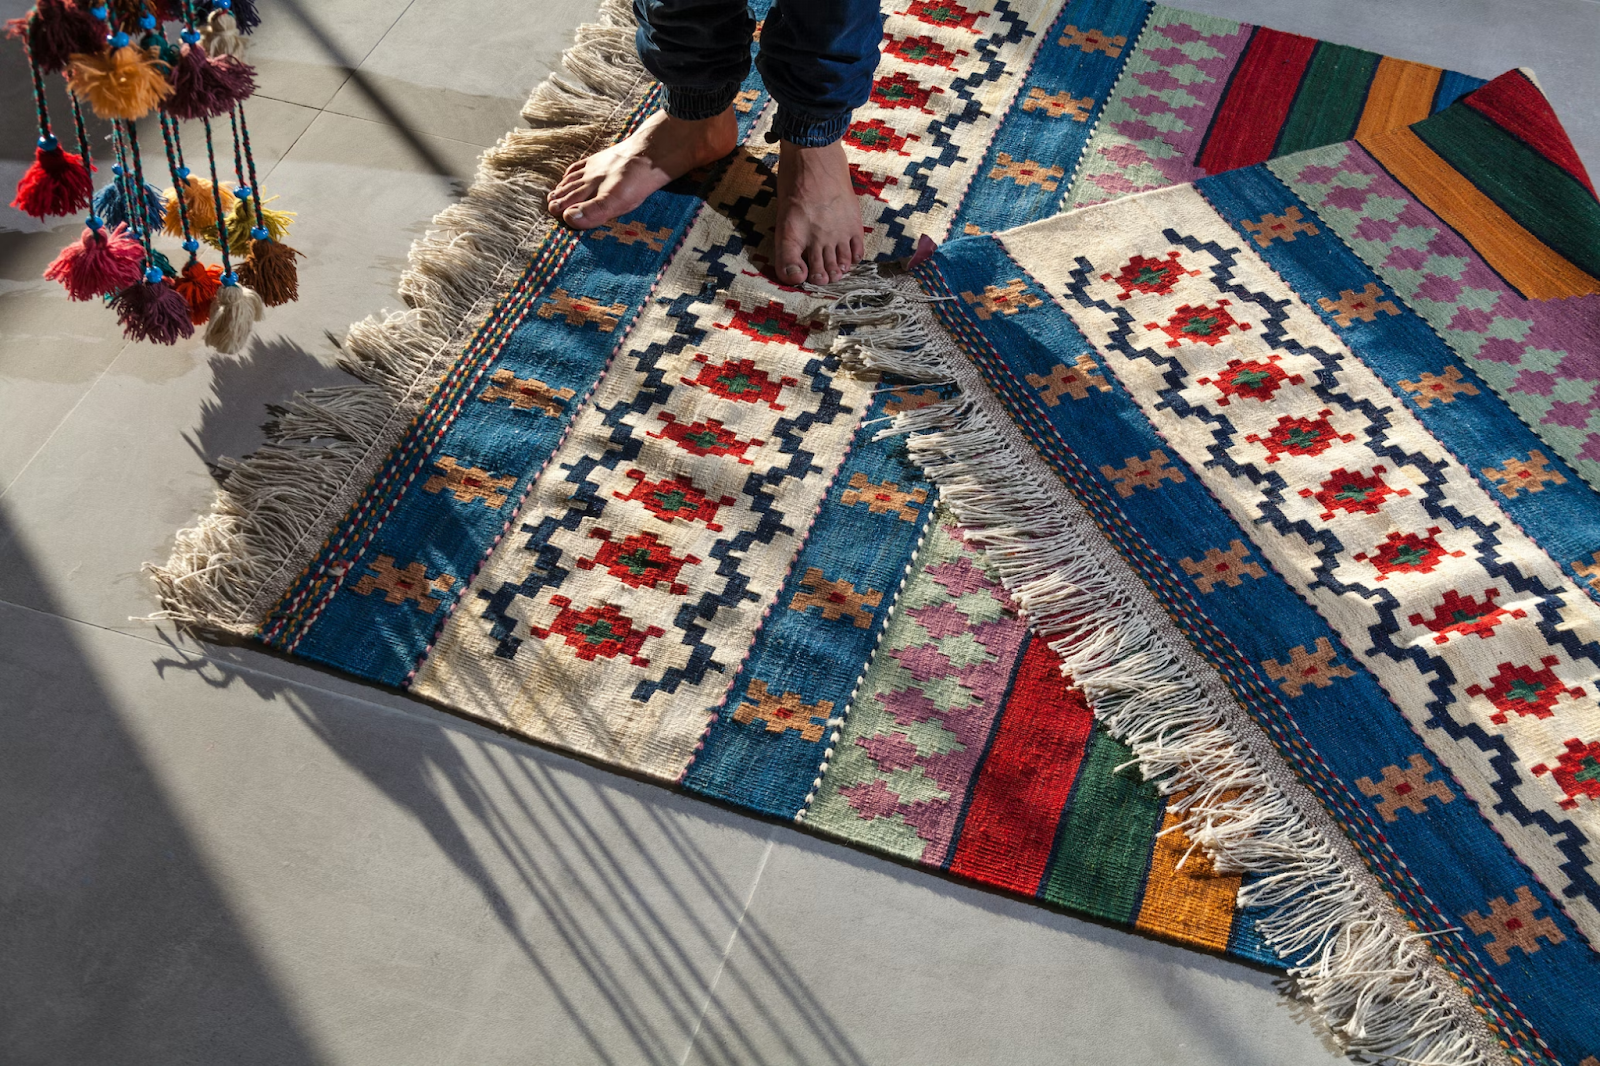 Cleaning rug in street is illegal in the UK